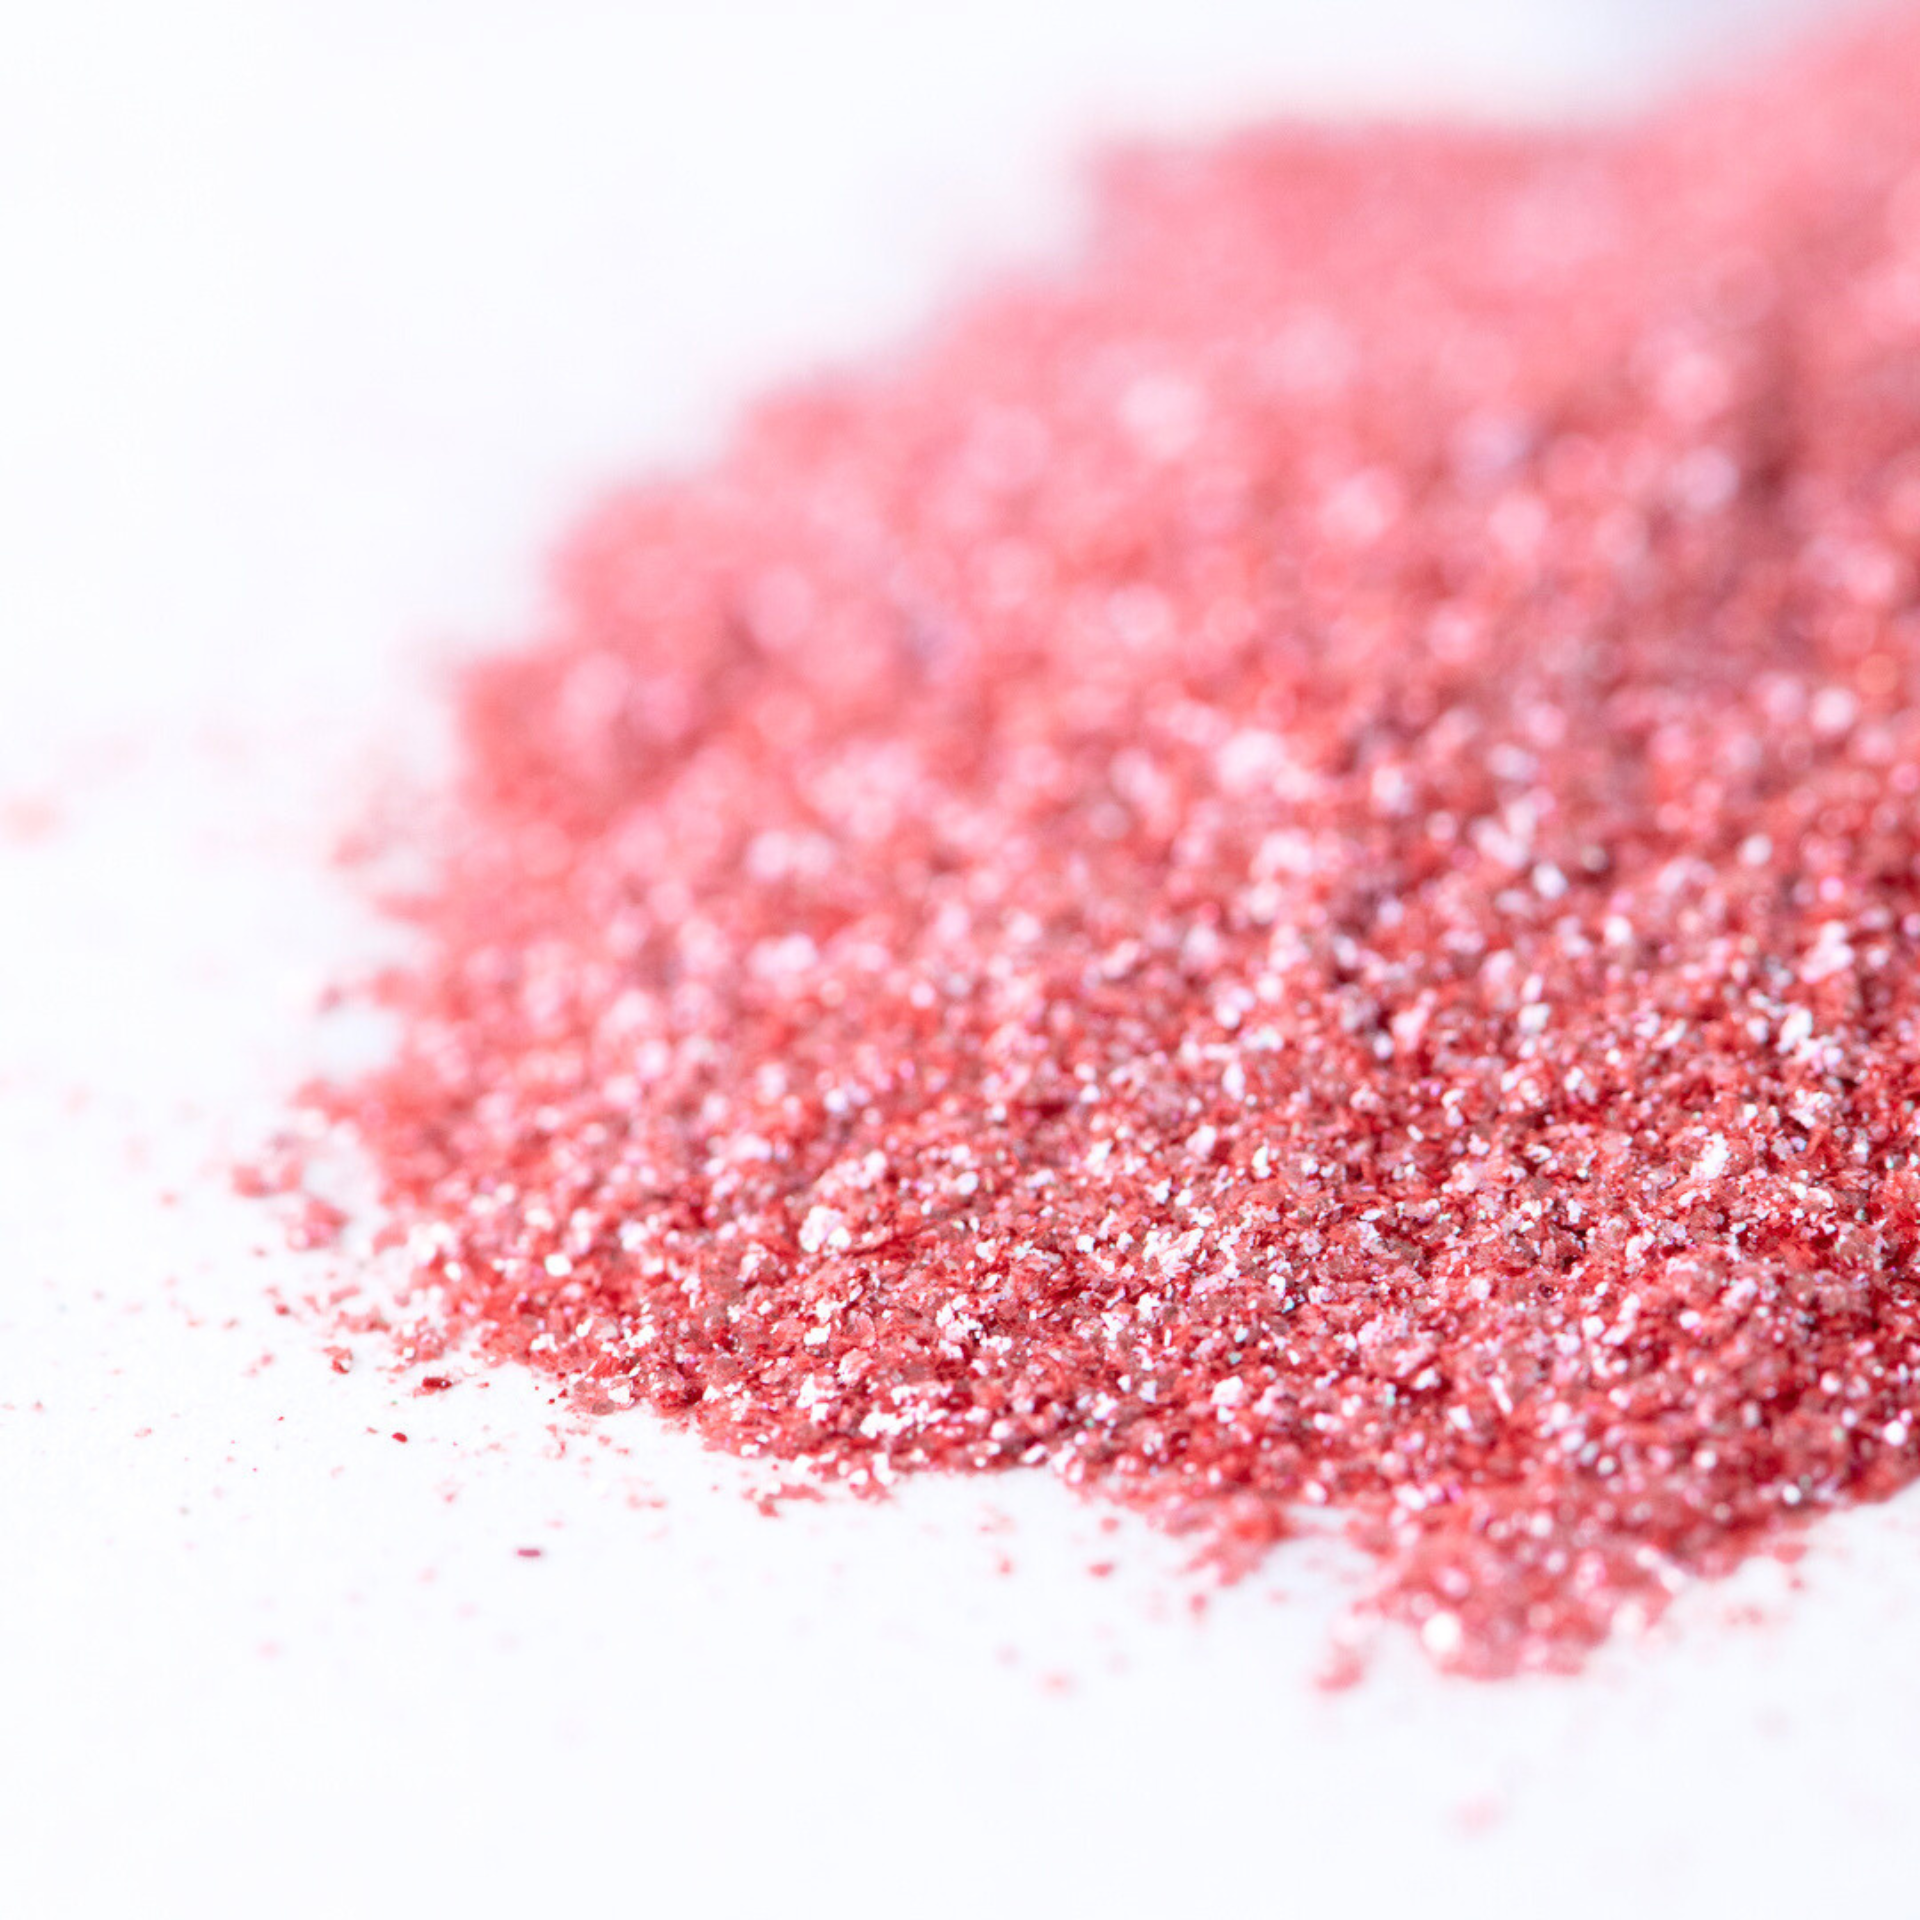 Edible Glitter, 100% Edible Glitter For Sparkling Food & Drinks No Taste Or  Texture (4G, Tourmaline Pink)